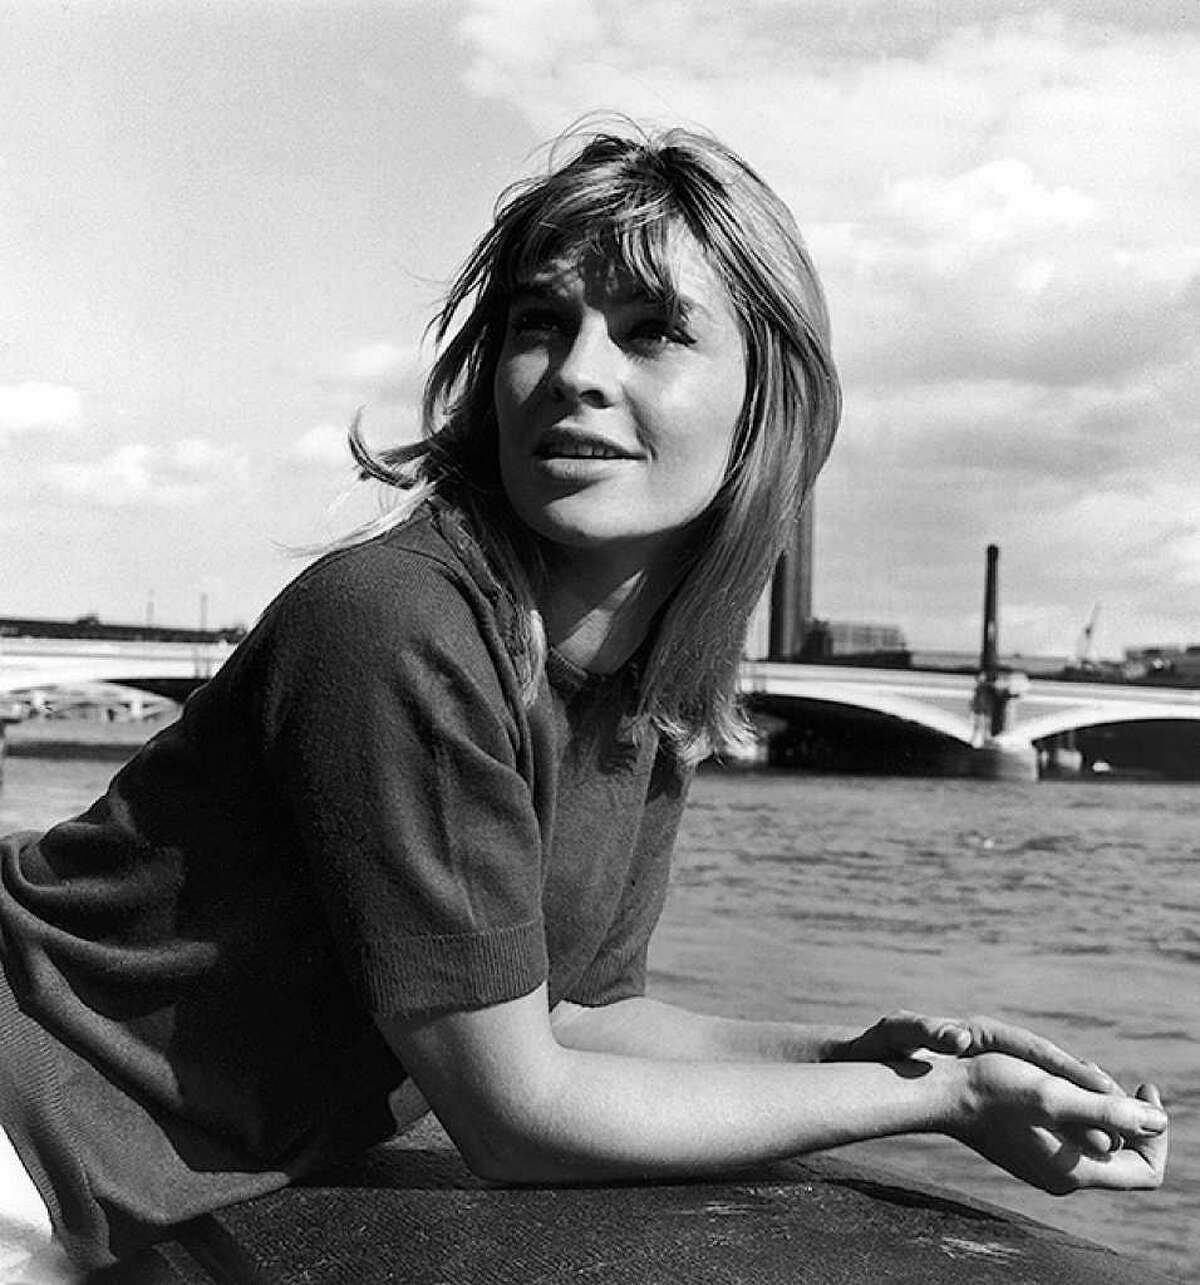 We begin our third installment of actresses through the years with a true classic, Julie Christie, seen next to the river Thames in London on Aug. 10, 1963, at the tender age of 22.